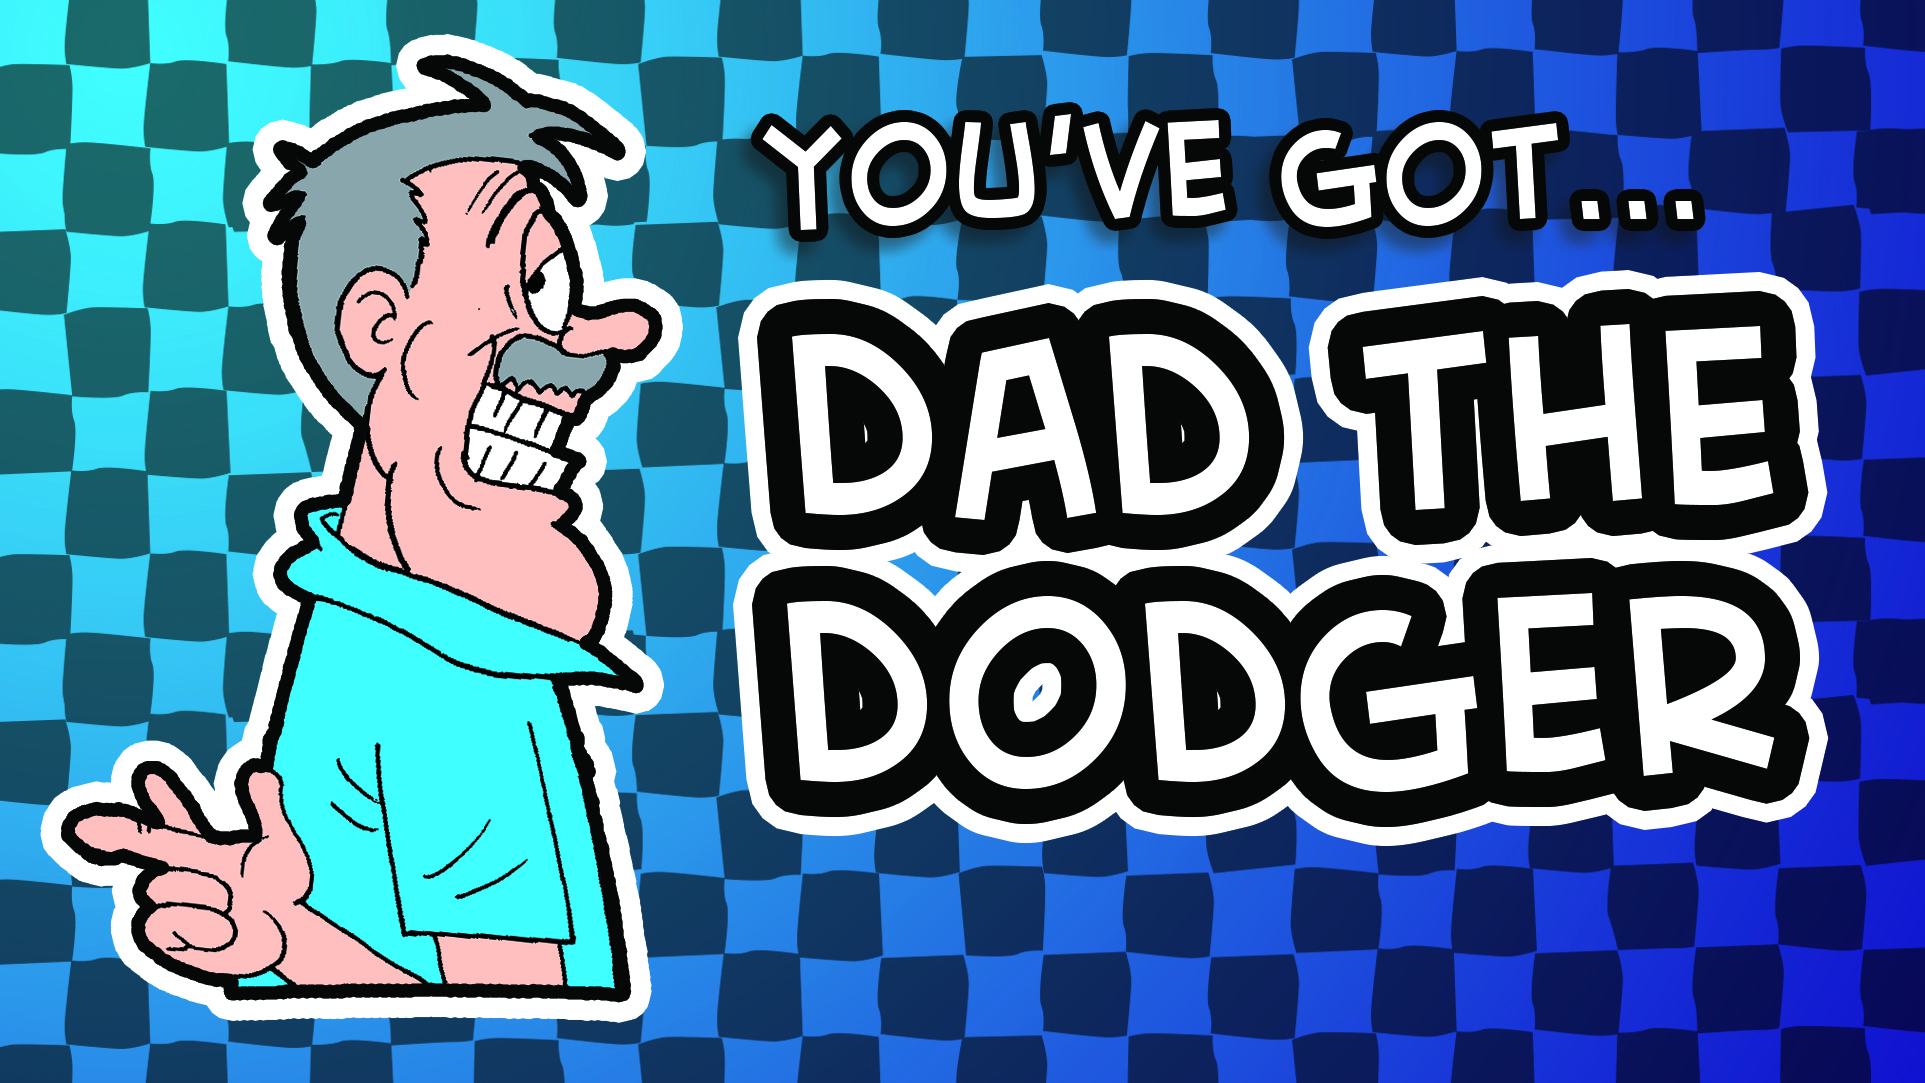 Dad the dodger is the laziest of all fathers!